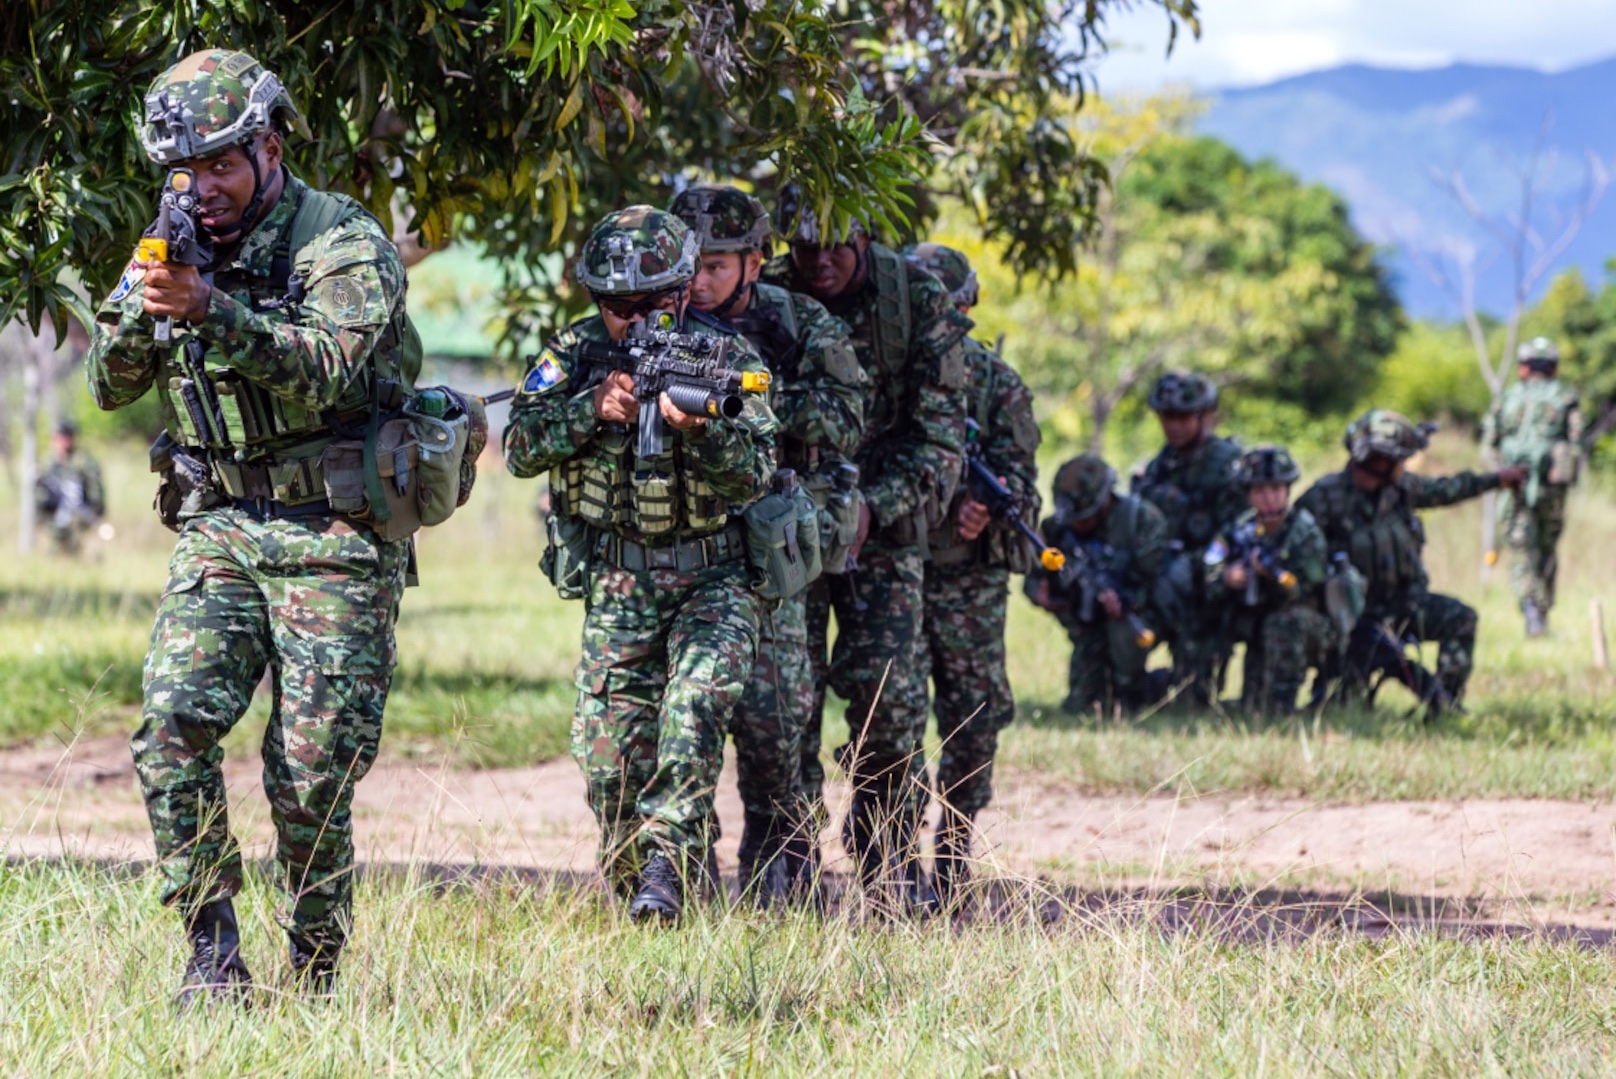 Colombia's military training